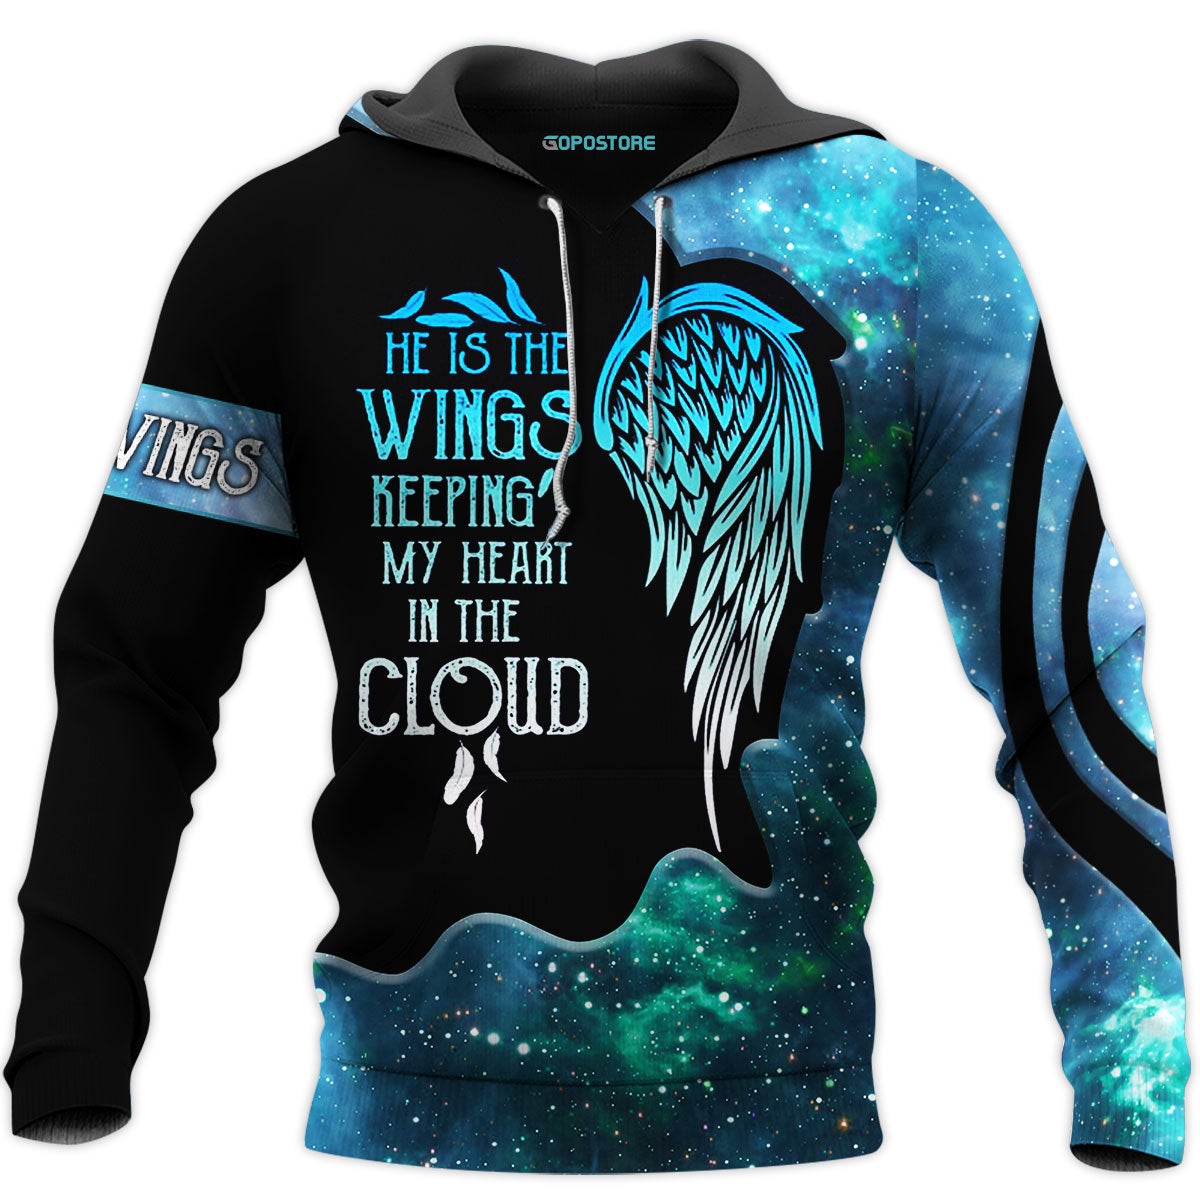 He Is The Wings Keeping My Heart In The Cloud 3D Shirt photo